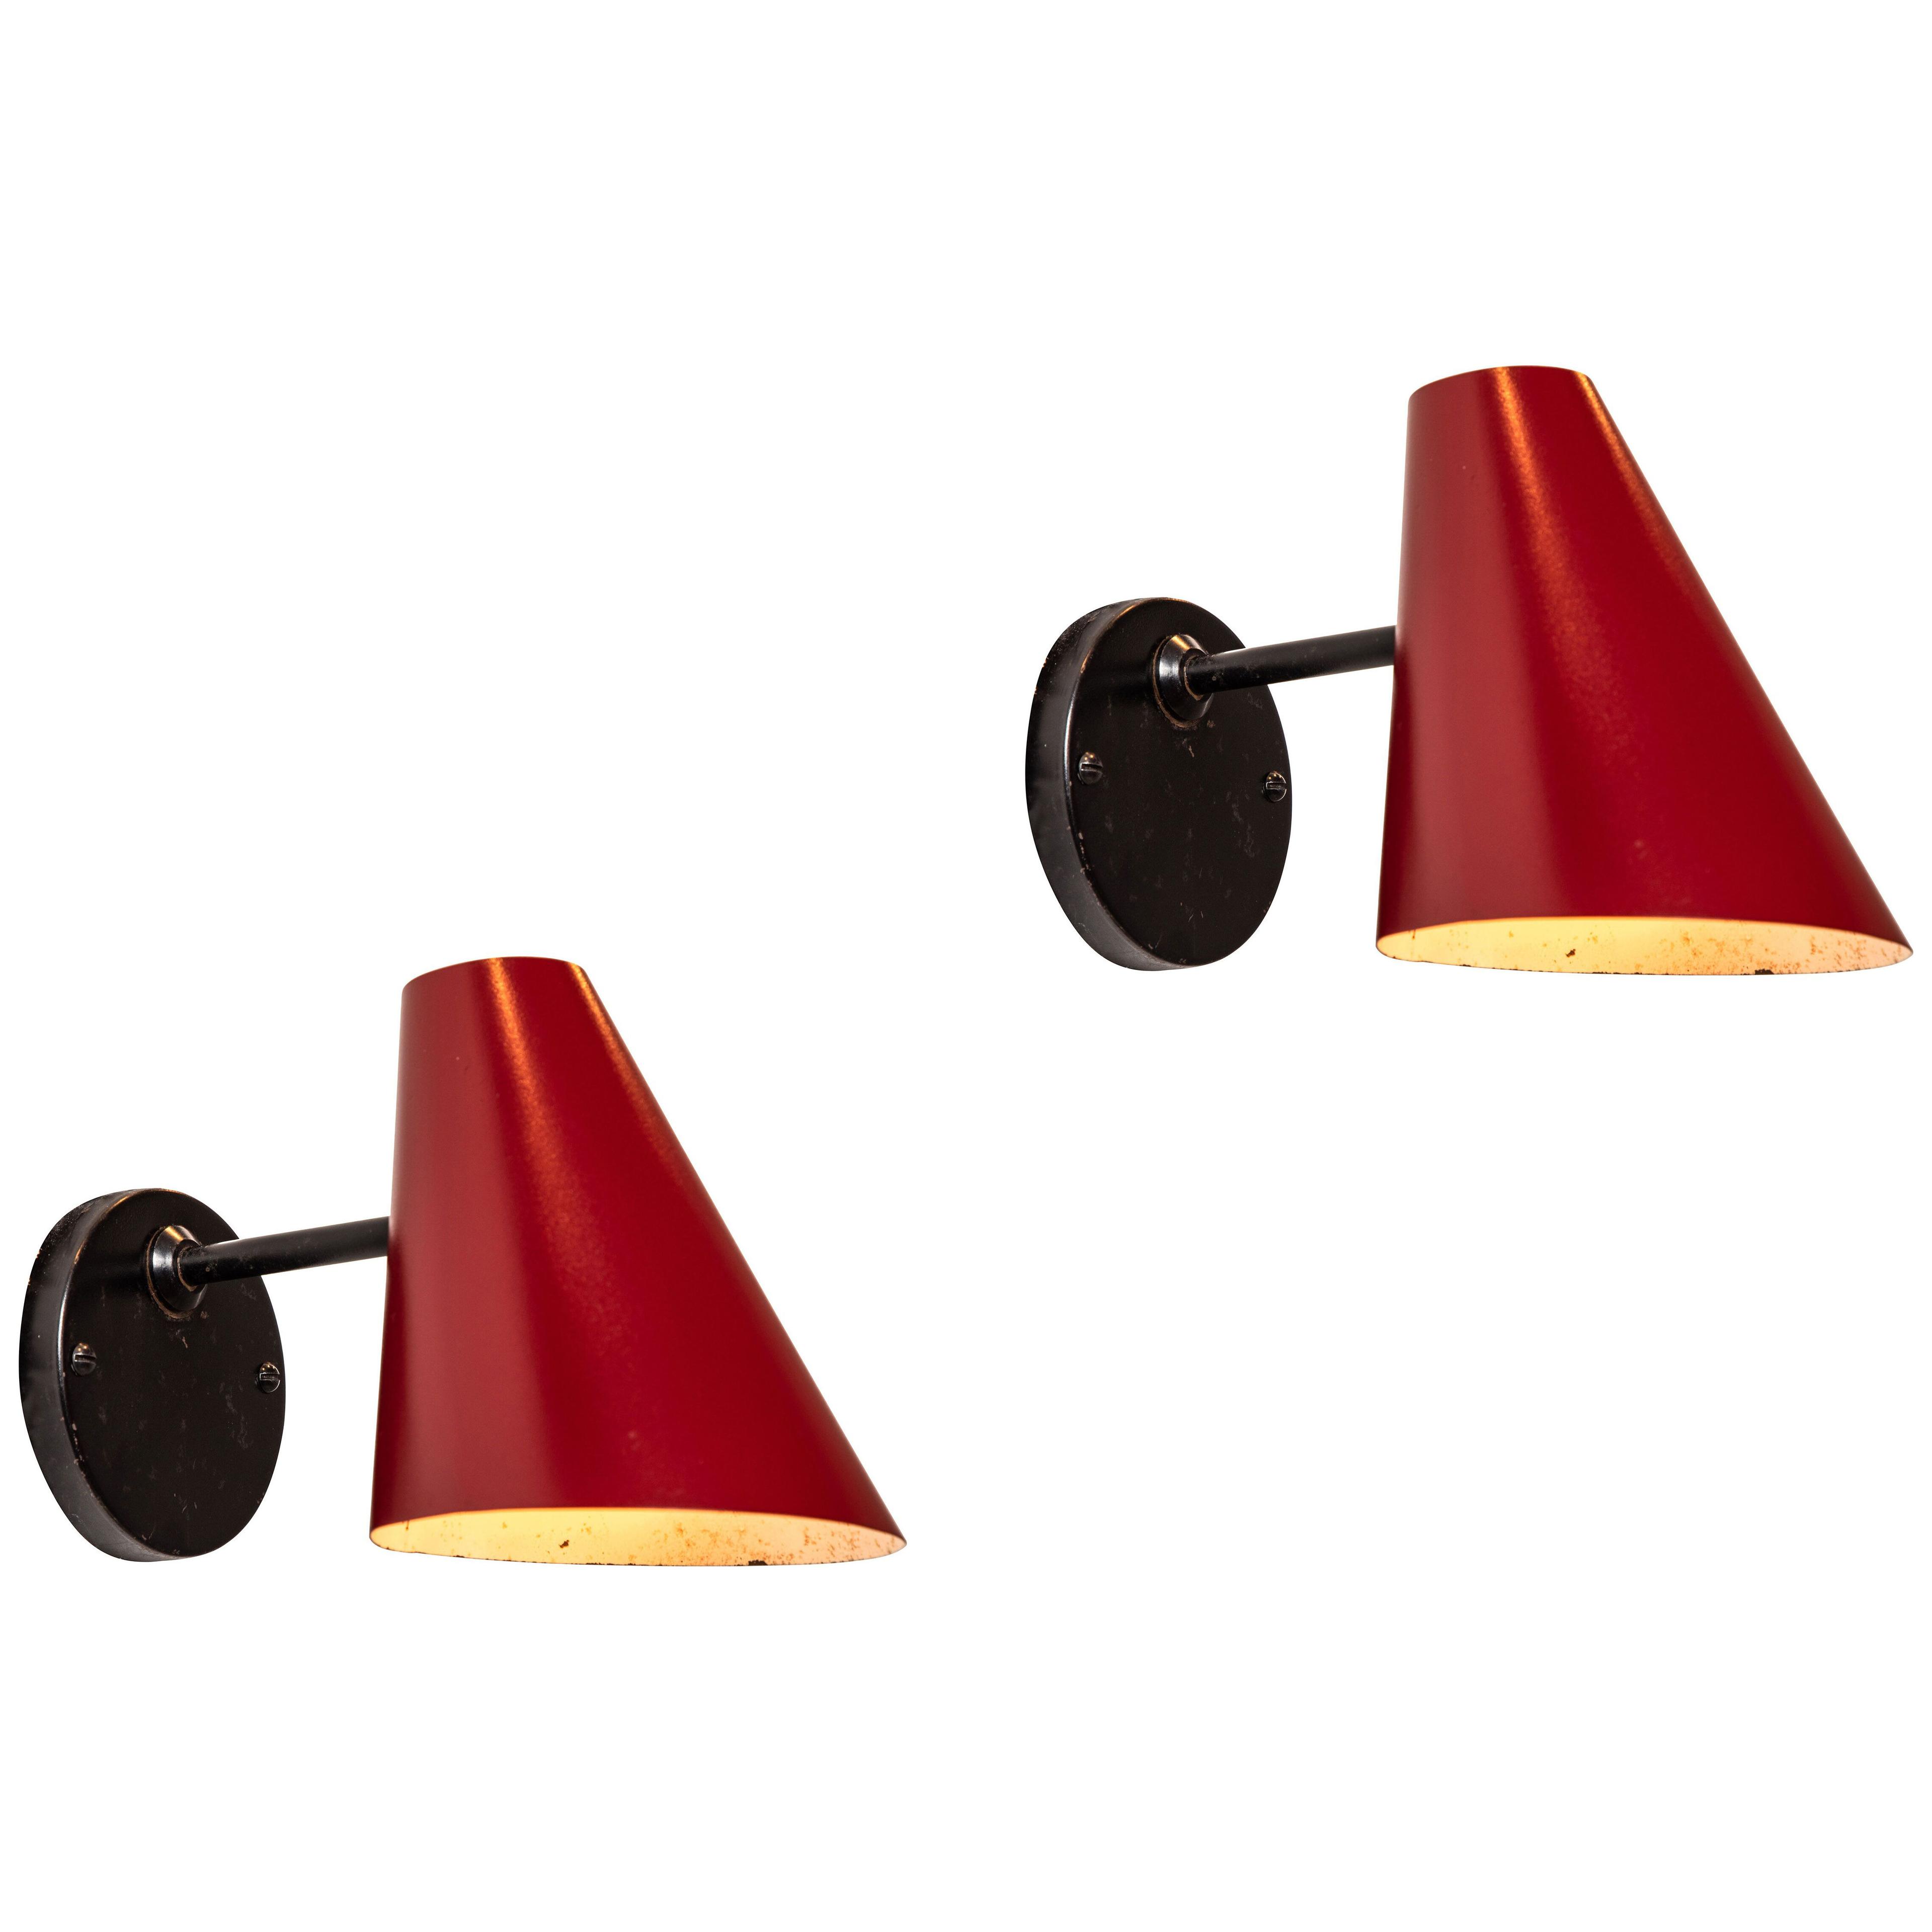 Pair of 1950s Jacques Biny Red & Black Wall Lights